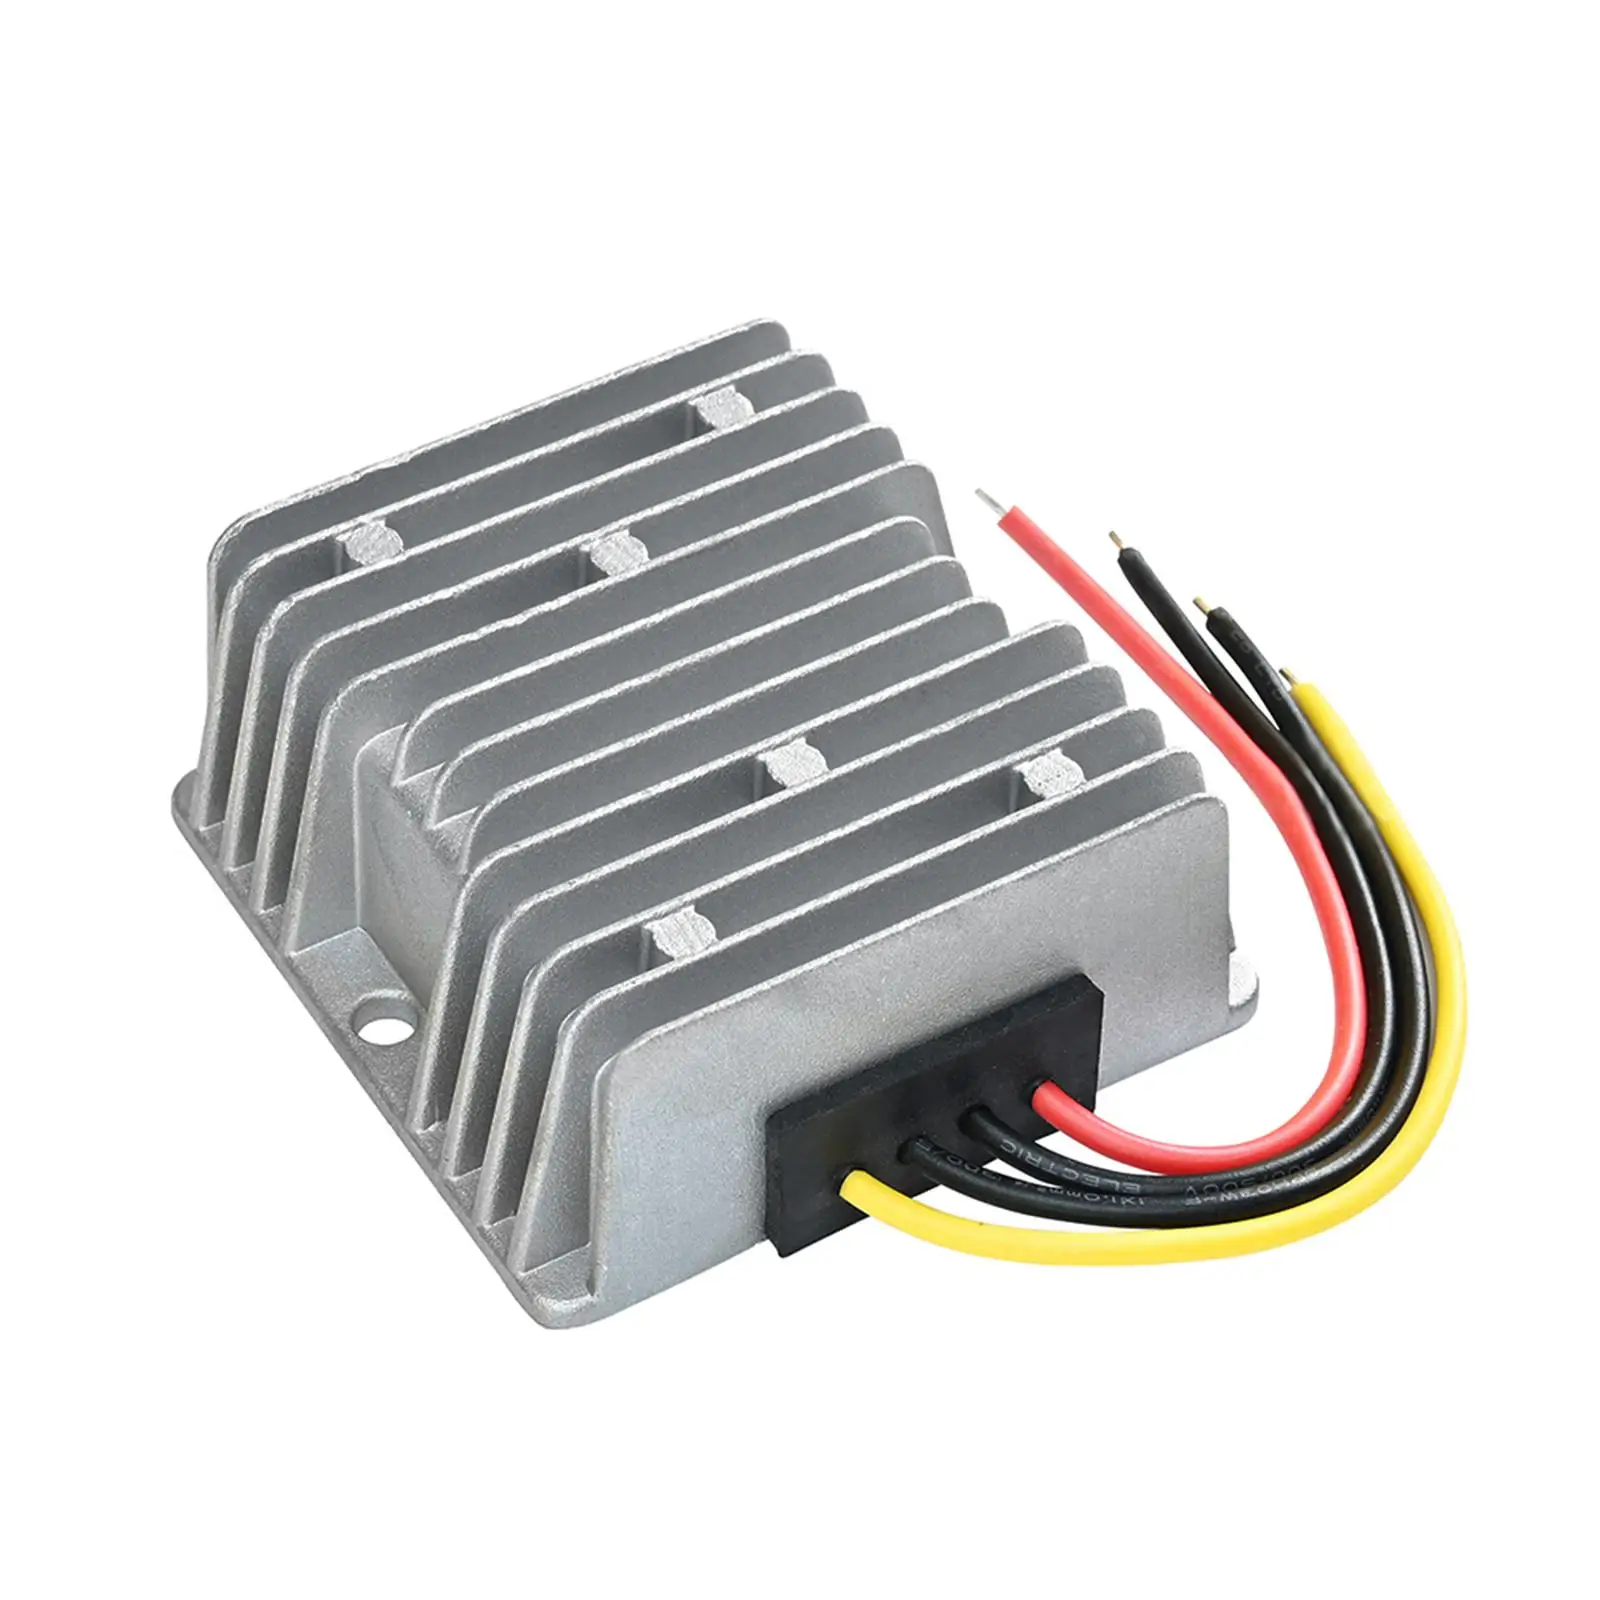 9-36V to 12V Converter Replaces Heat Dissipation IP68 Waterproof Automatic Voltage Regulator for Audio Car